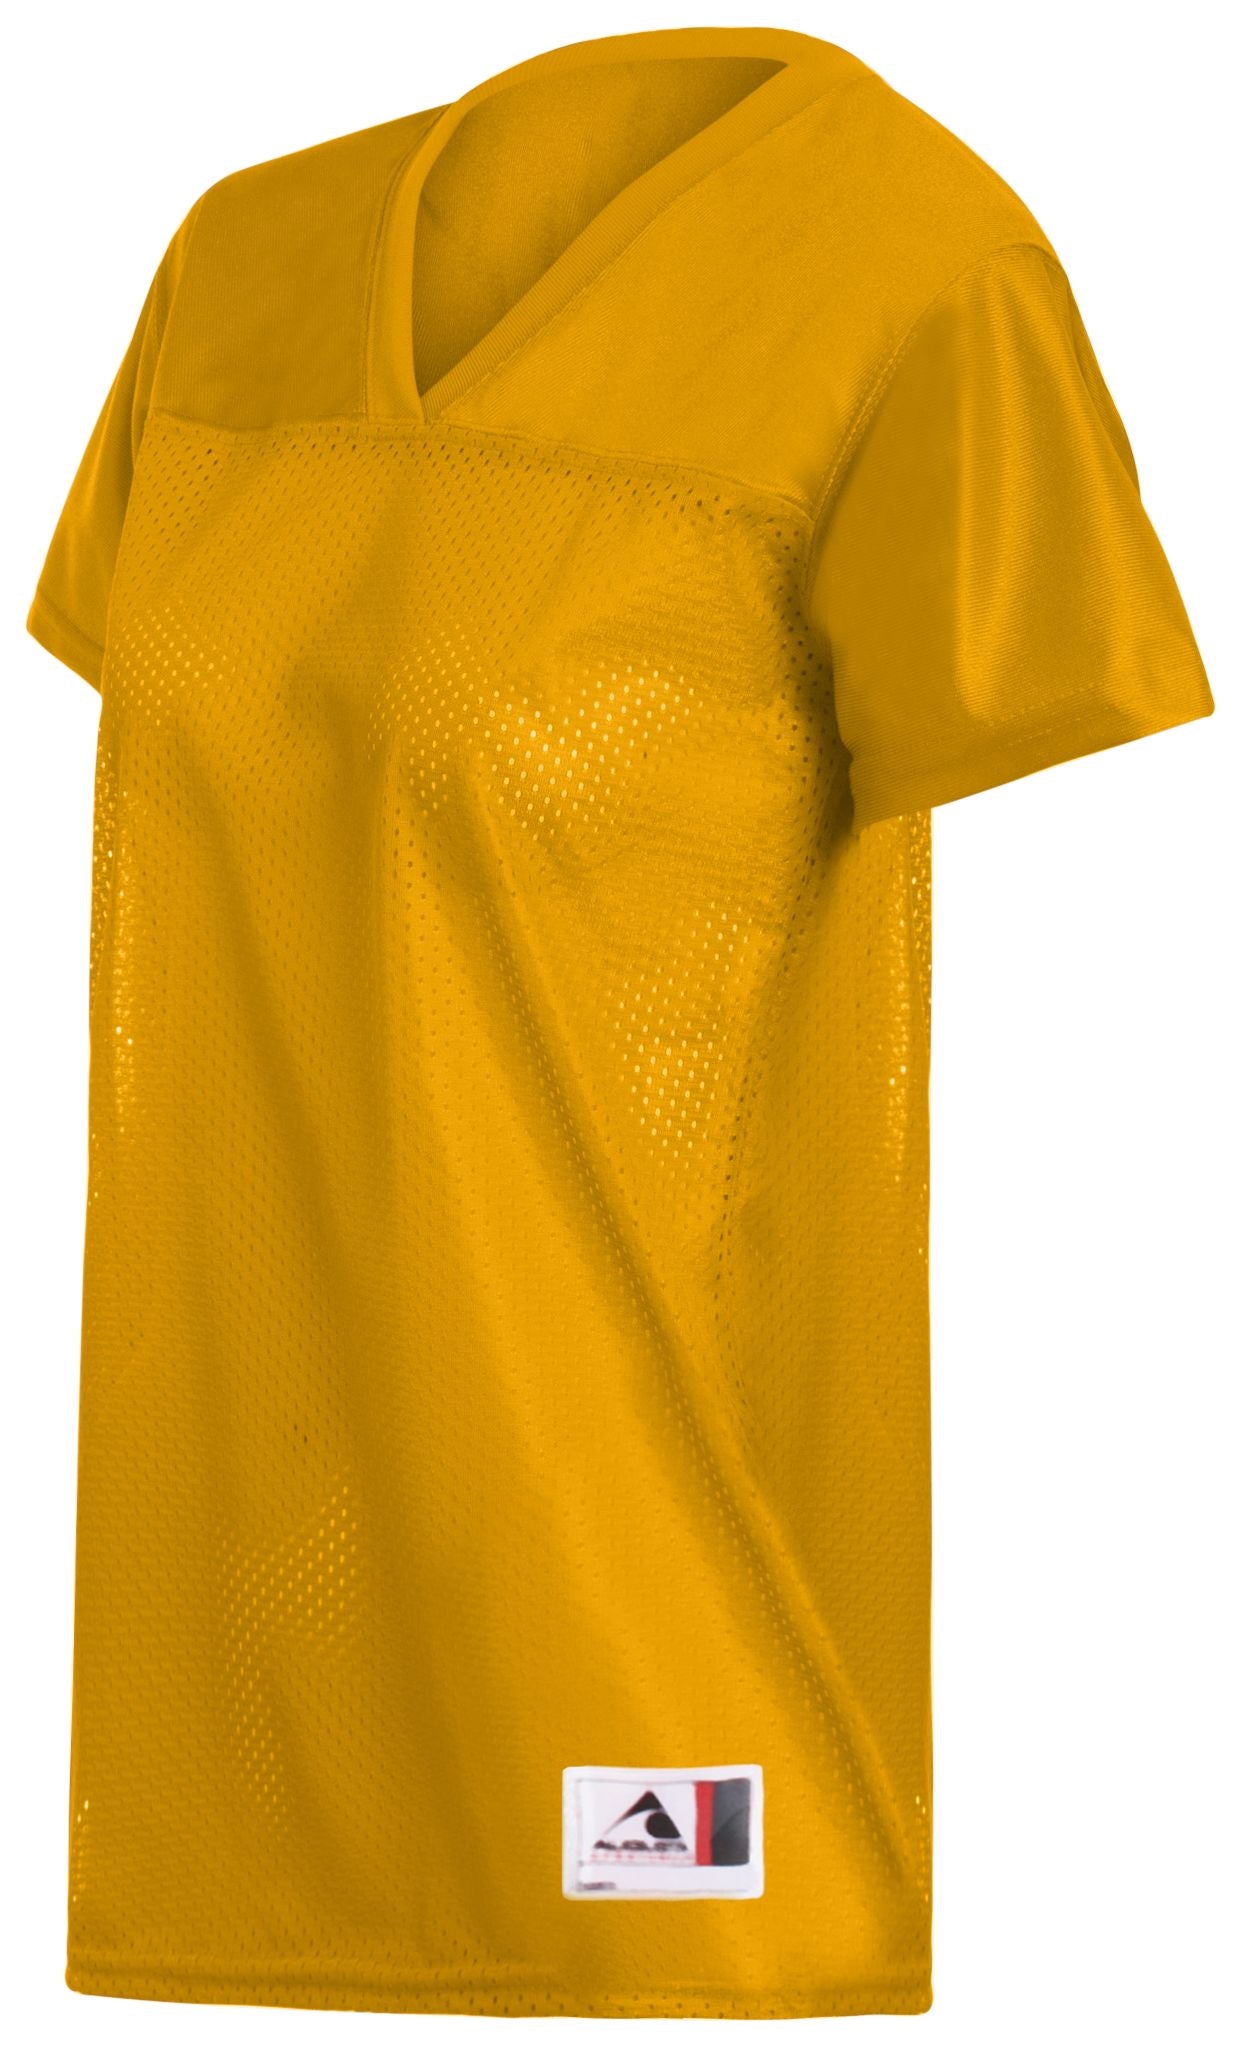 Augusta Sportswear Ladies Replica Football Tee in Gold  -Part of the Ladies, Ladies-Jersey, Augusta-Products, Football, Shirts, All-Sports, All-Sports-1 product lines at KanaleyCreations.com